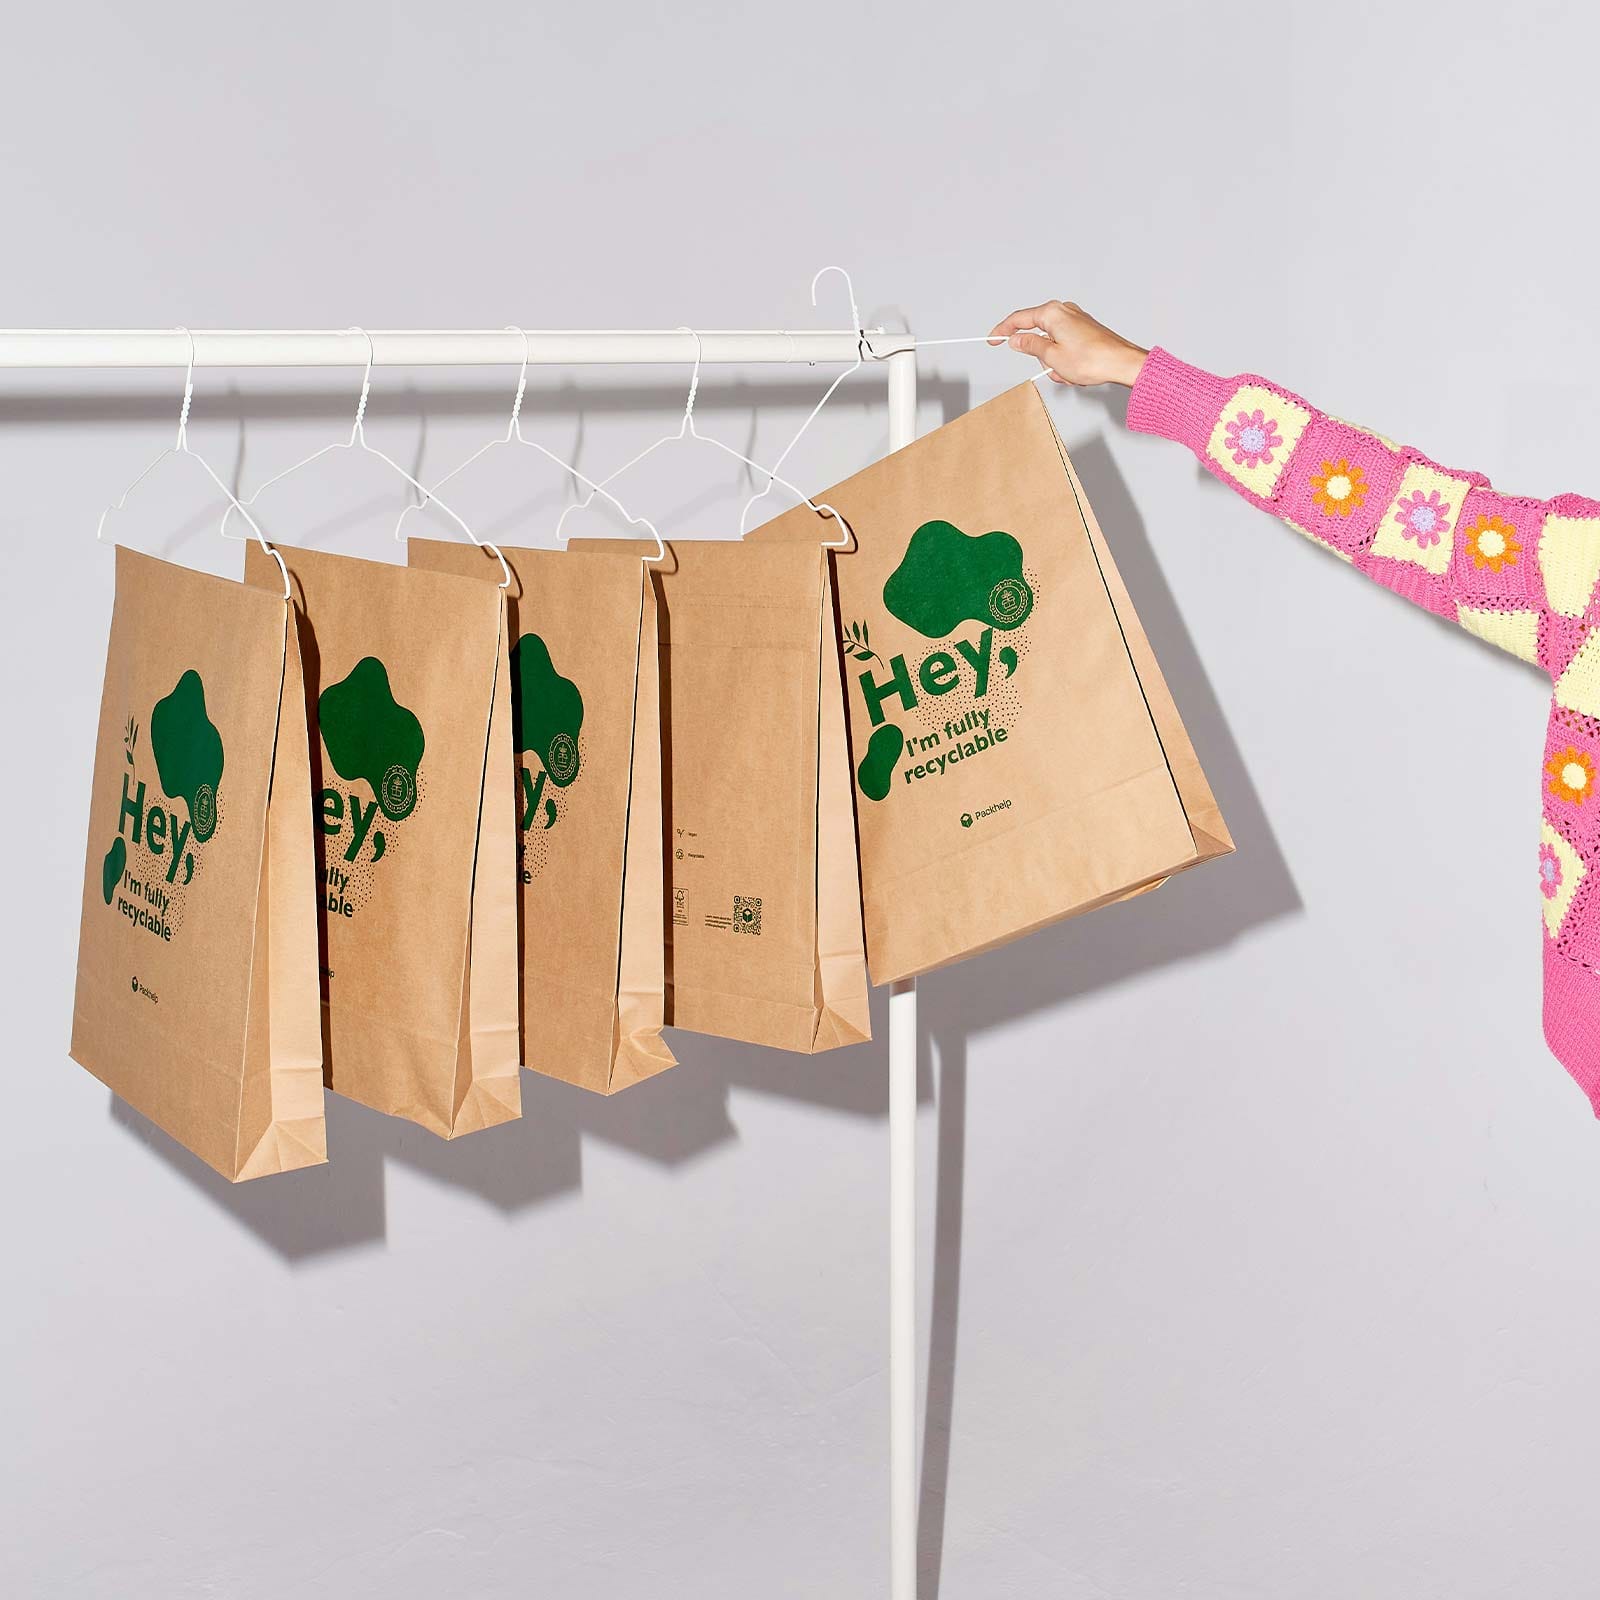 Sustainability sto eCommerce five paper bags hanged with a girl's hand in 